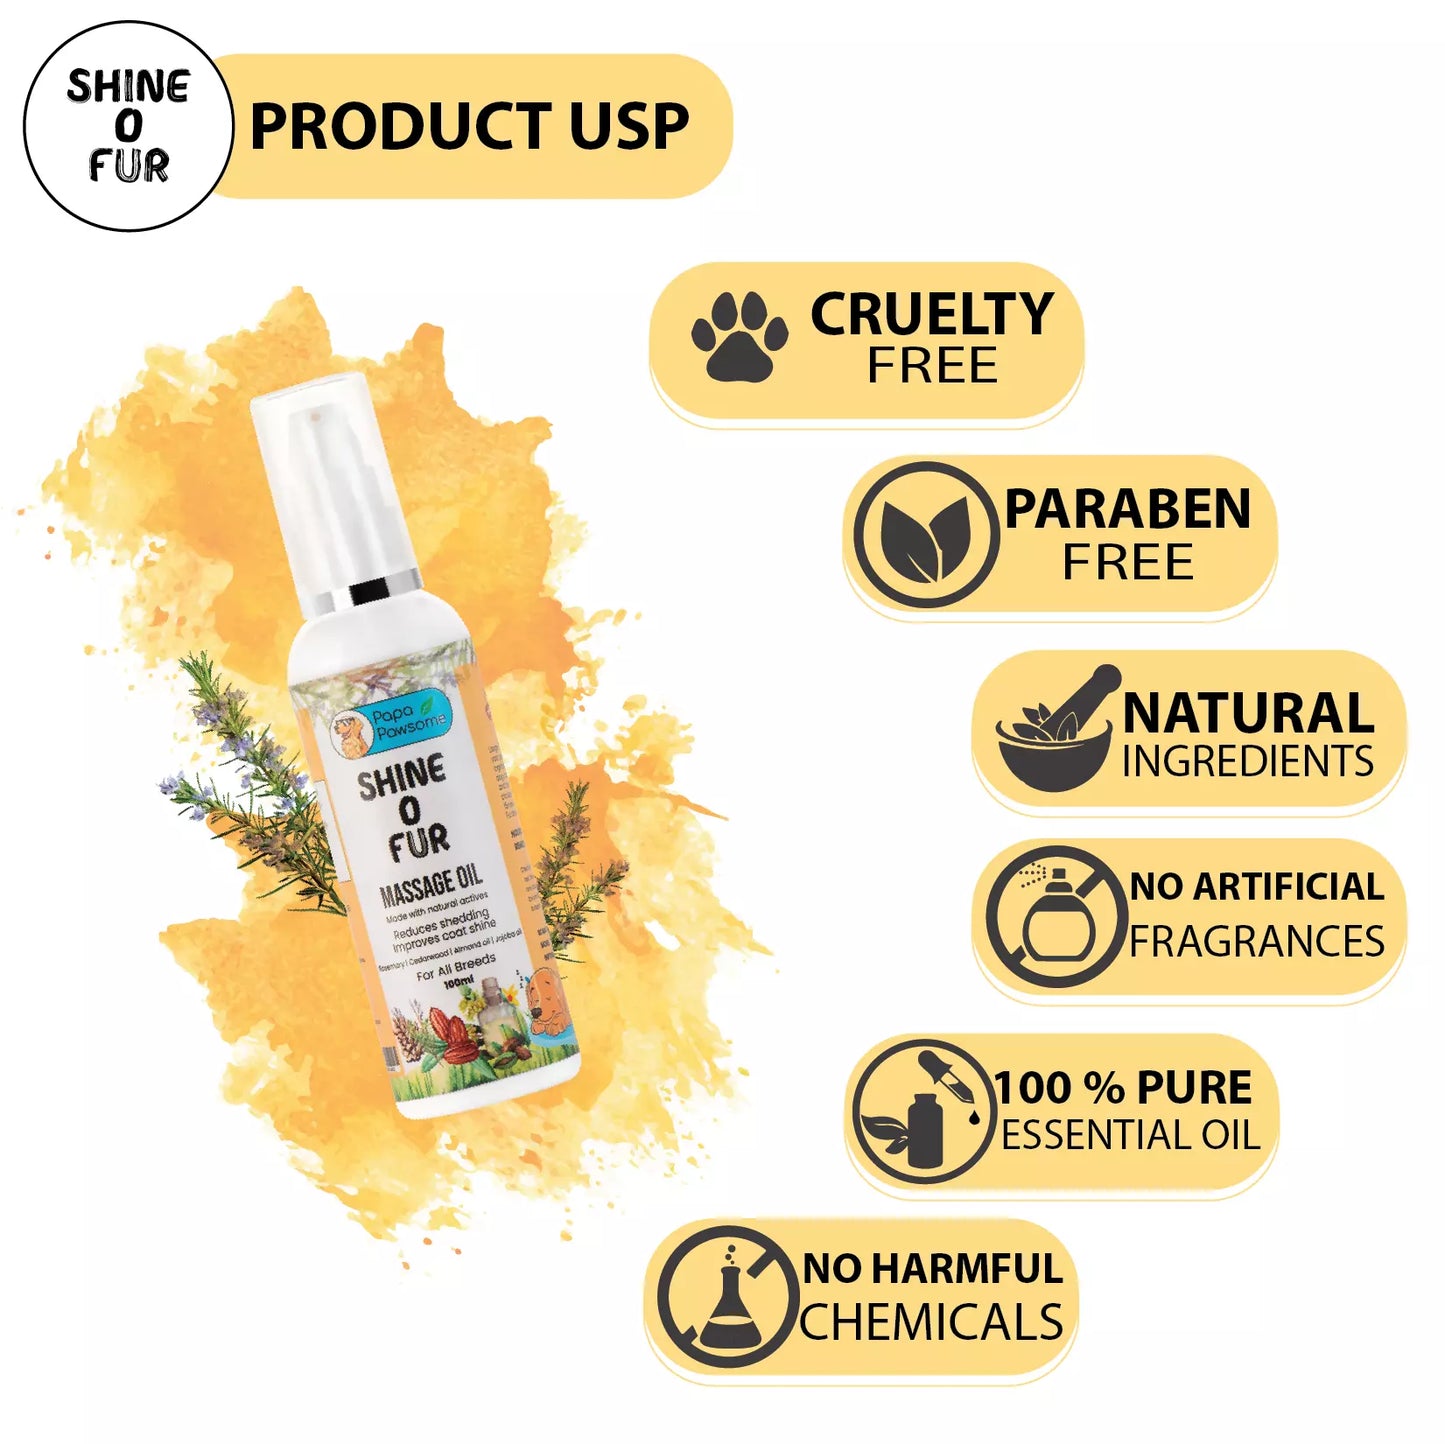 Our dog coat oil is cruelty-free, paraben-free, made with natural ingredients, no artificial fragrances, 100% pure essential oils, and free from harmful chemicals